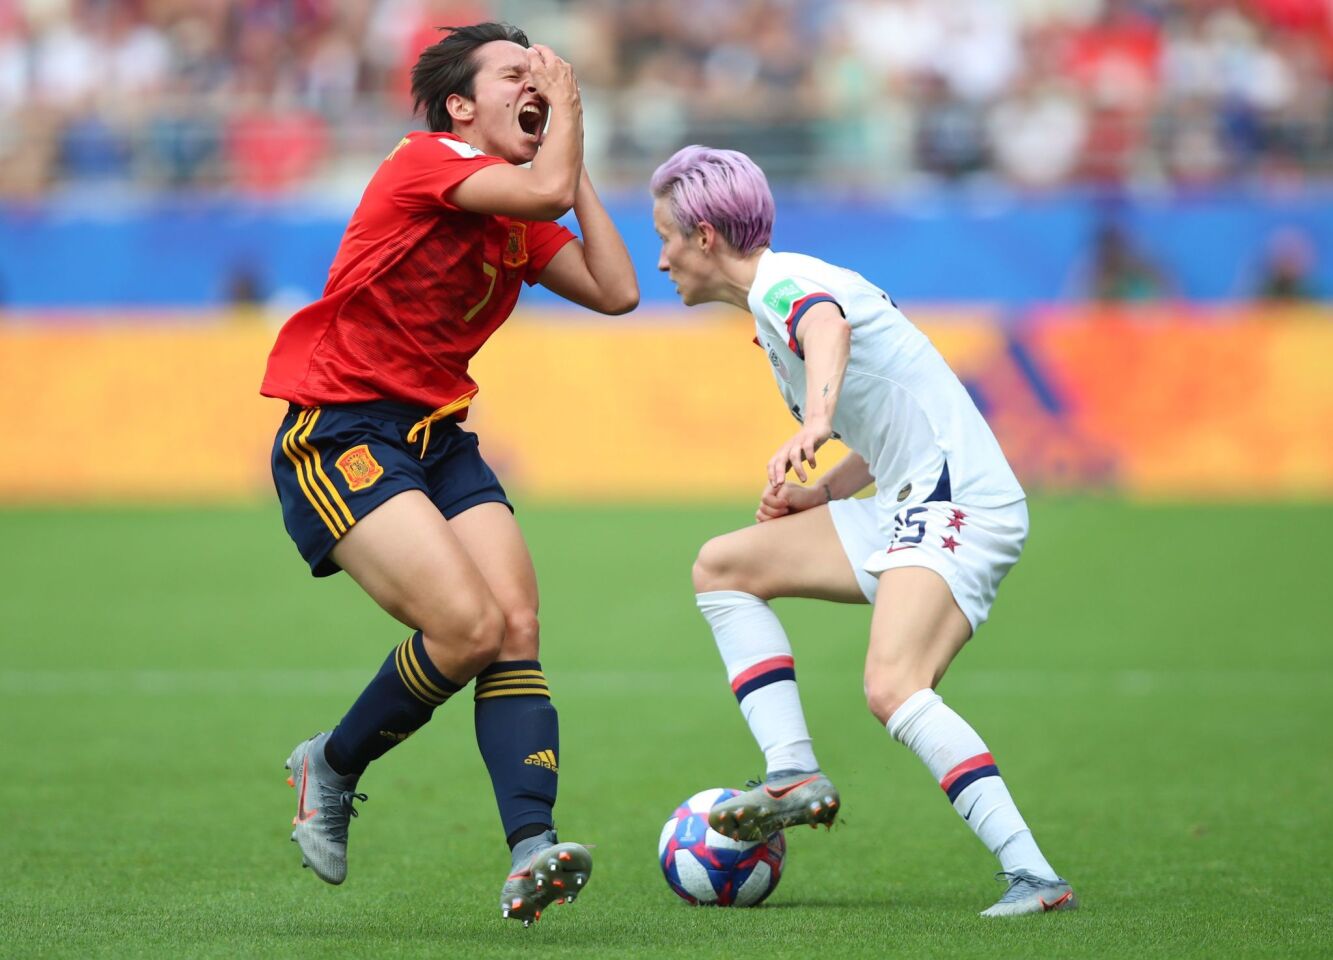 Mandatory Credit: Photo by TOLGA BOZOGLU/EPA-EFE/REX (10320464ag) Megan Rapinoe (R) of USA in action against Marta Corredera (L) of Spain during the FIFA Women's World Cup 2019 round of 16 soccer match between Spain and USA at Reims, France, 24 June 2019. FIFA Women's World Cup 2019, Reims, France - 24 Jun 2019 ** Usable by LA, CT and MoD ONLY **